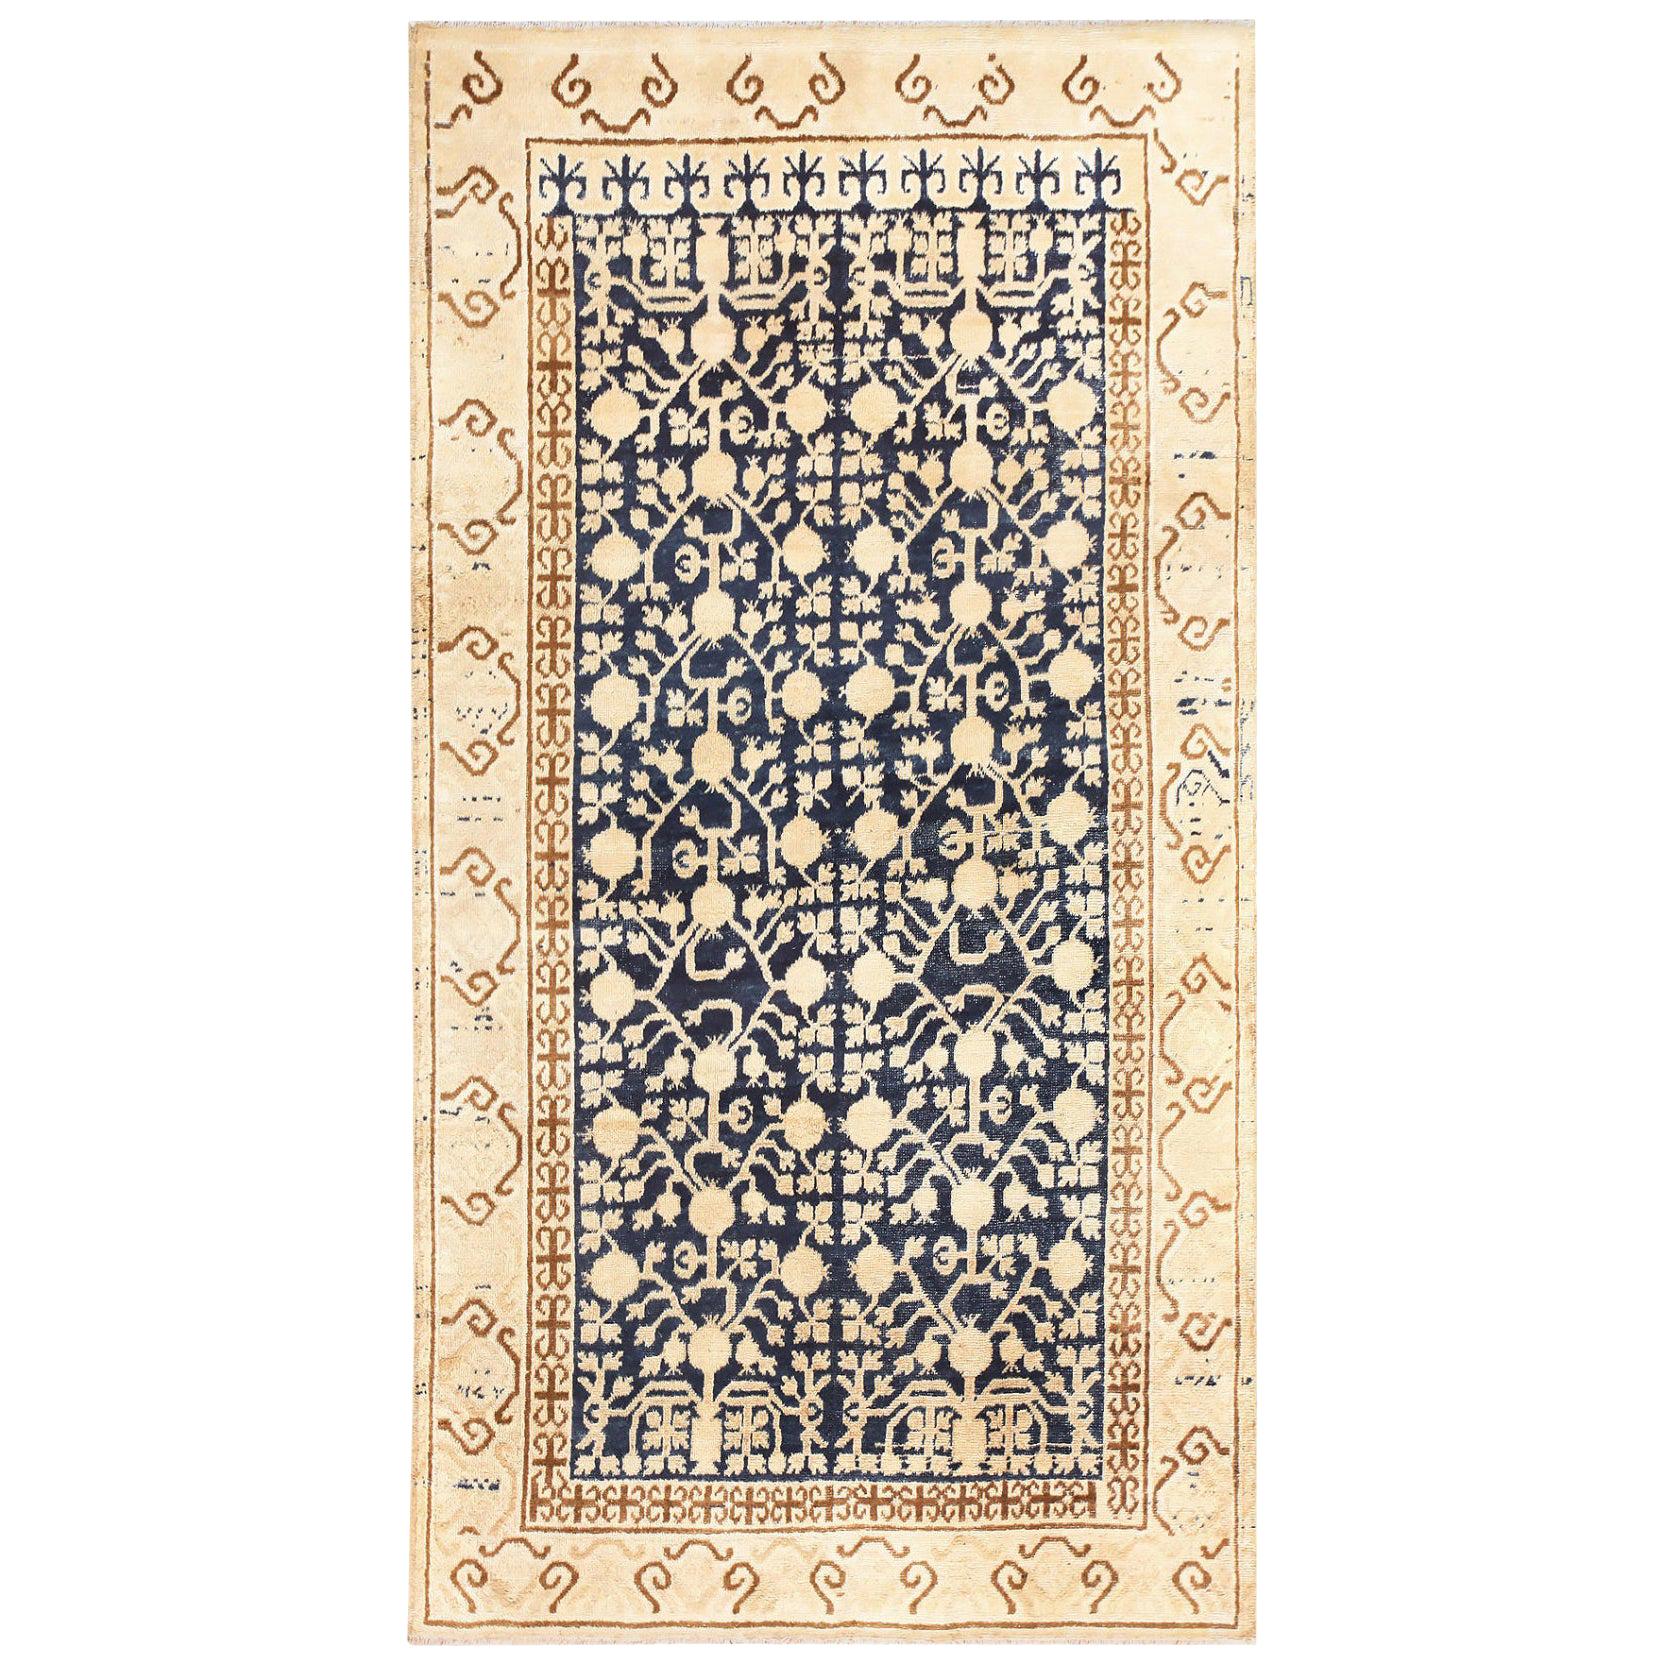 Small Pomegranate Design Antique Khotan Rug. Size: 4 ft 6 in x 8 ft 3 in